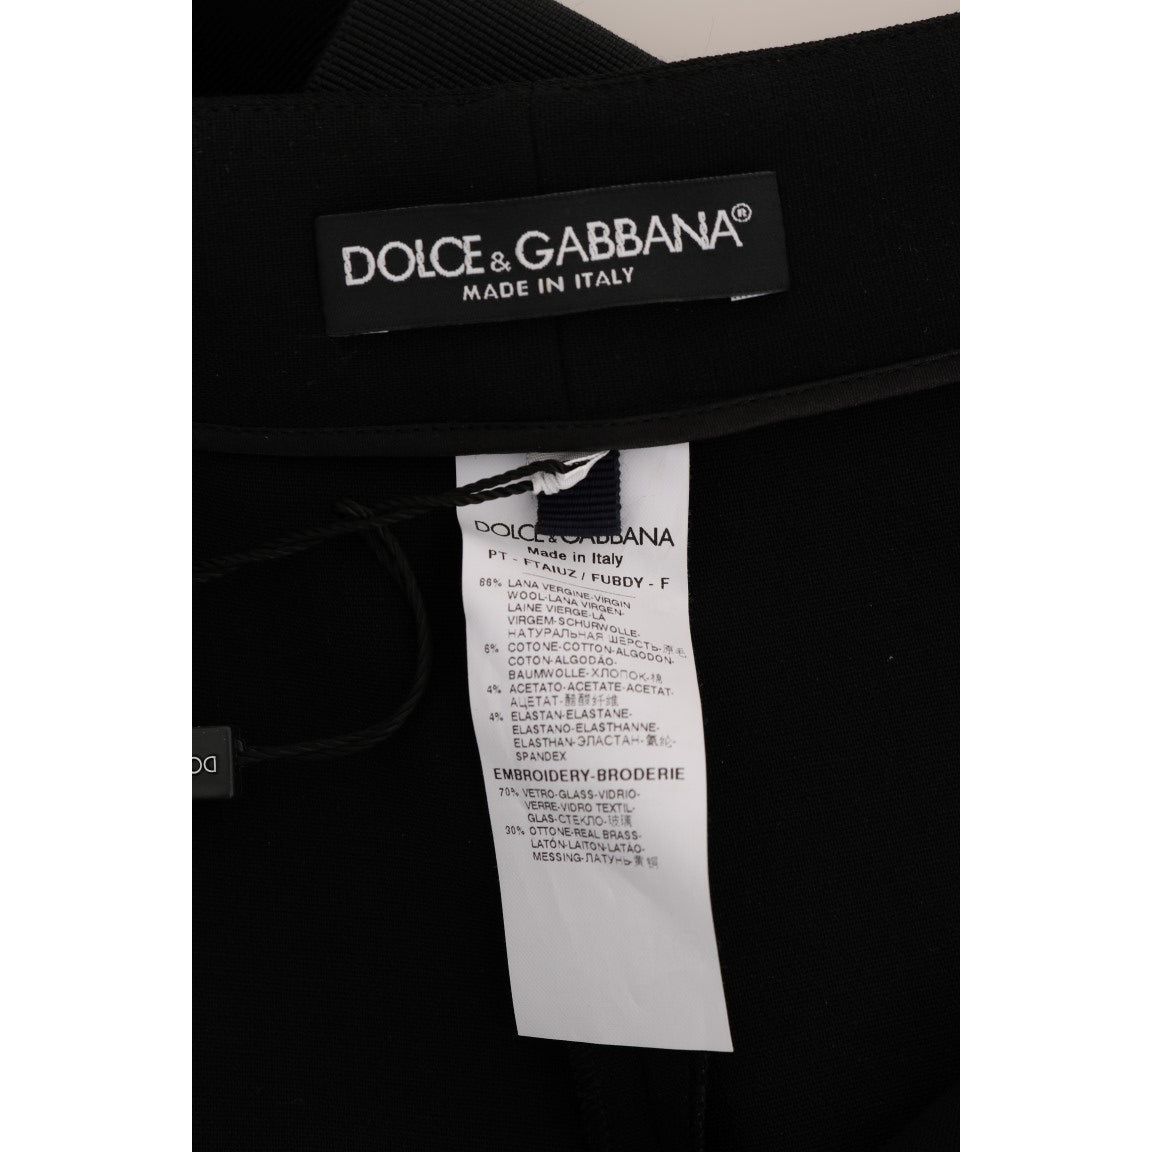 Dolce & Gabbana Elegant High-Waist Ankle Pants with Gold Detailing black-wool-stretch-crystal-pants Jeans & Pants 513120-black-wool-stretch-crystal-pants-6.jpg